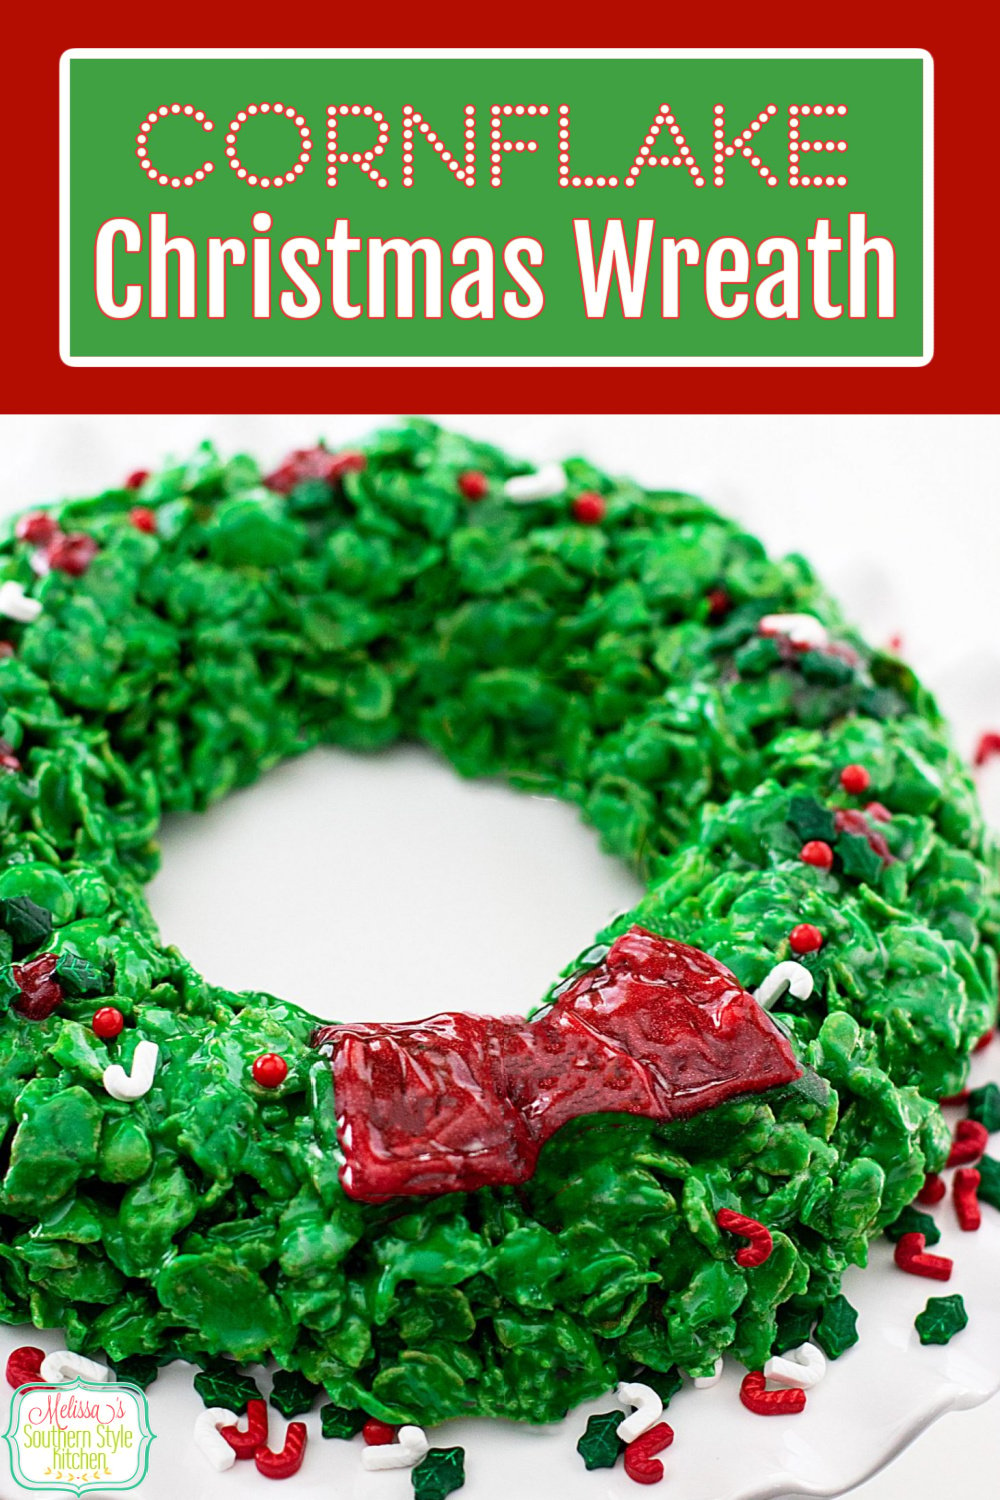 These easy Cornflake Christmas Wreath is a delicious kid-friendly project that will get the entire family involved in making #cornflakewreaths #christmaswreaths #cornflakes #cornflaketreats #marshmallows #desserts #christmas #christmasdesserts #kidfriendly #dessertfoodrecipes #southernfood #southernrecipes via @melissasssk